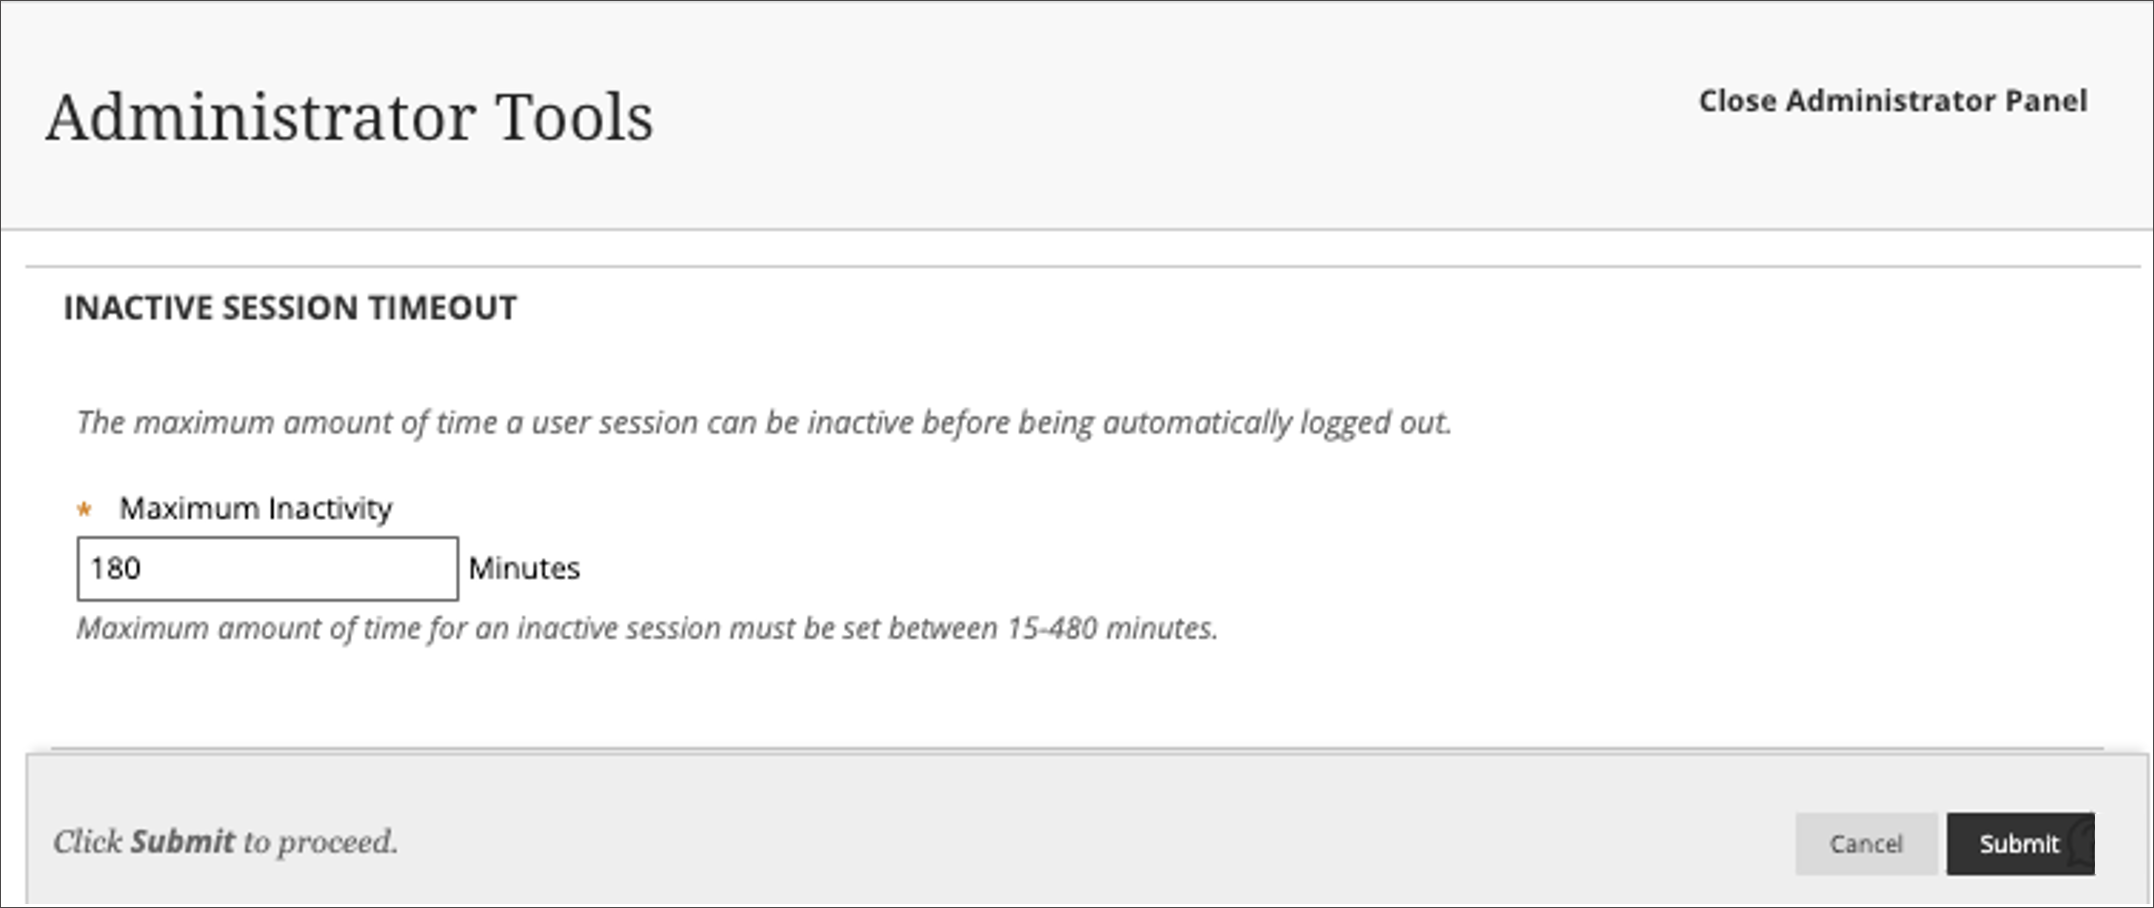 Inactive session time-out configuration from the Administrator Tool Panel